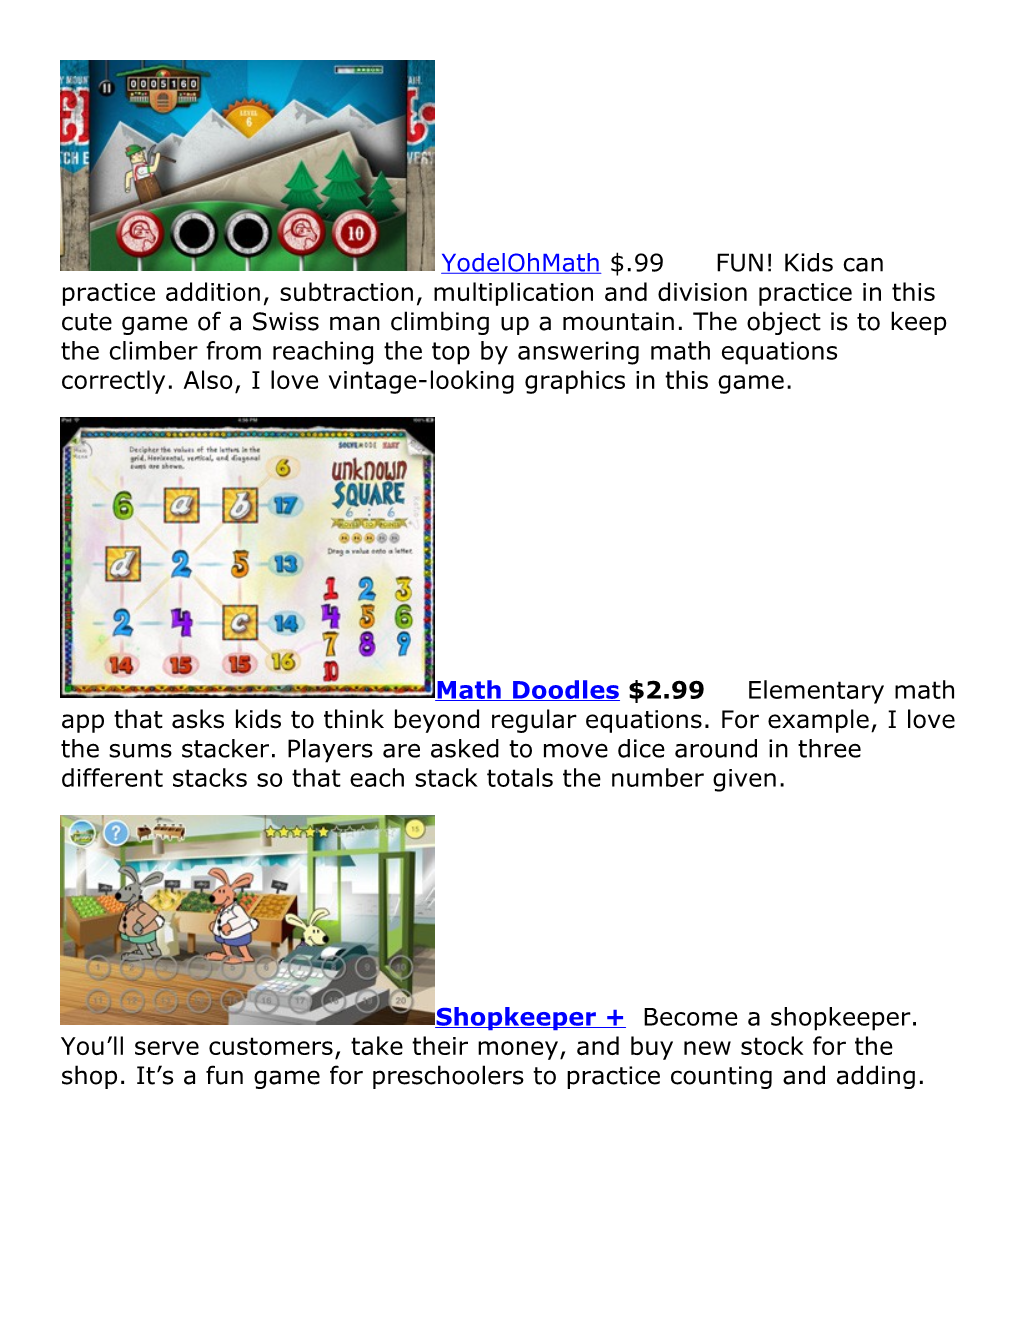 Yodelohmath $.99 FUN! Kids Can Practice Addition, Subtraction, Multiplication and Division